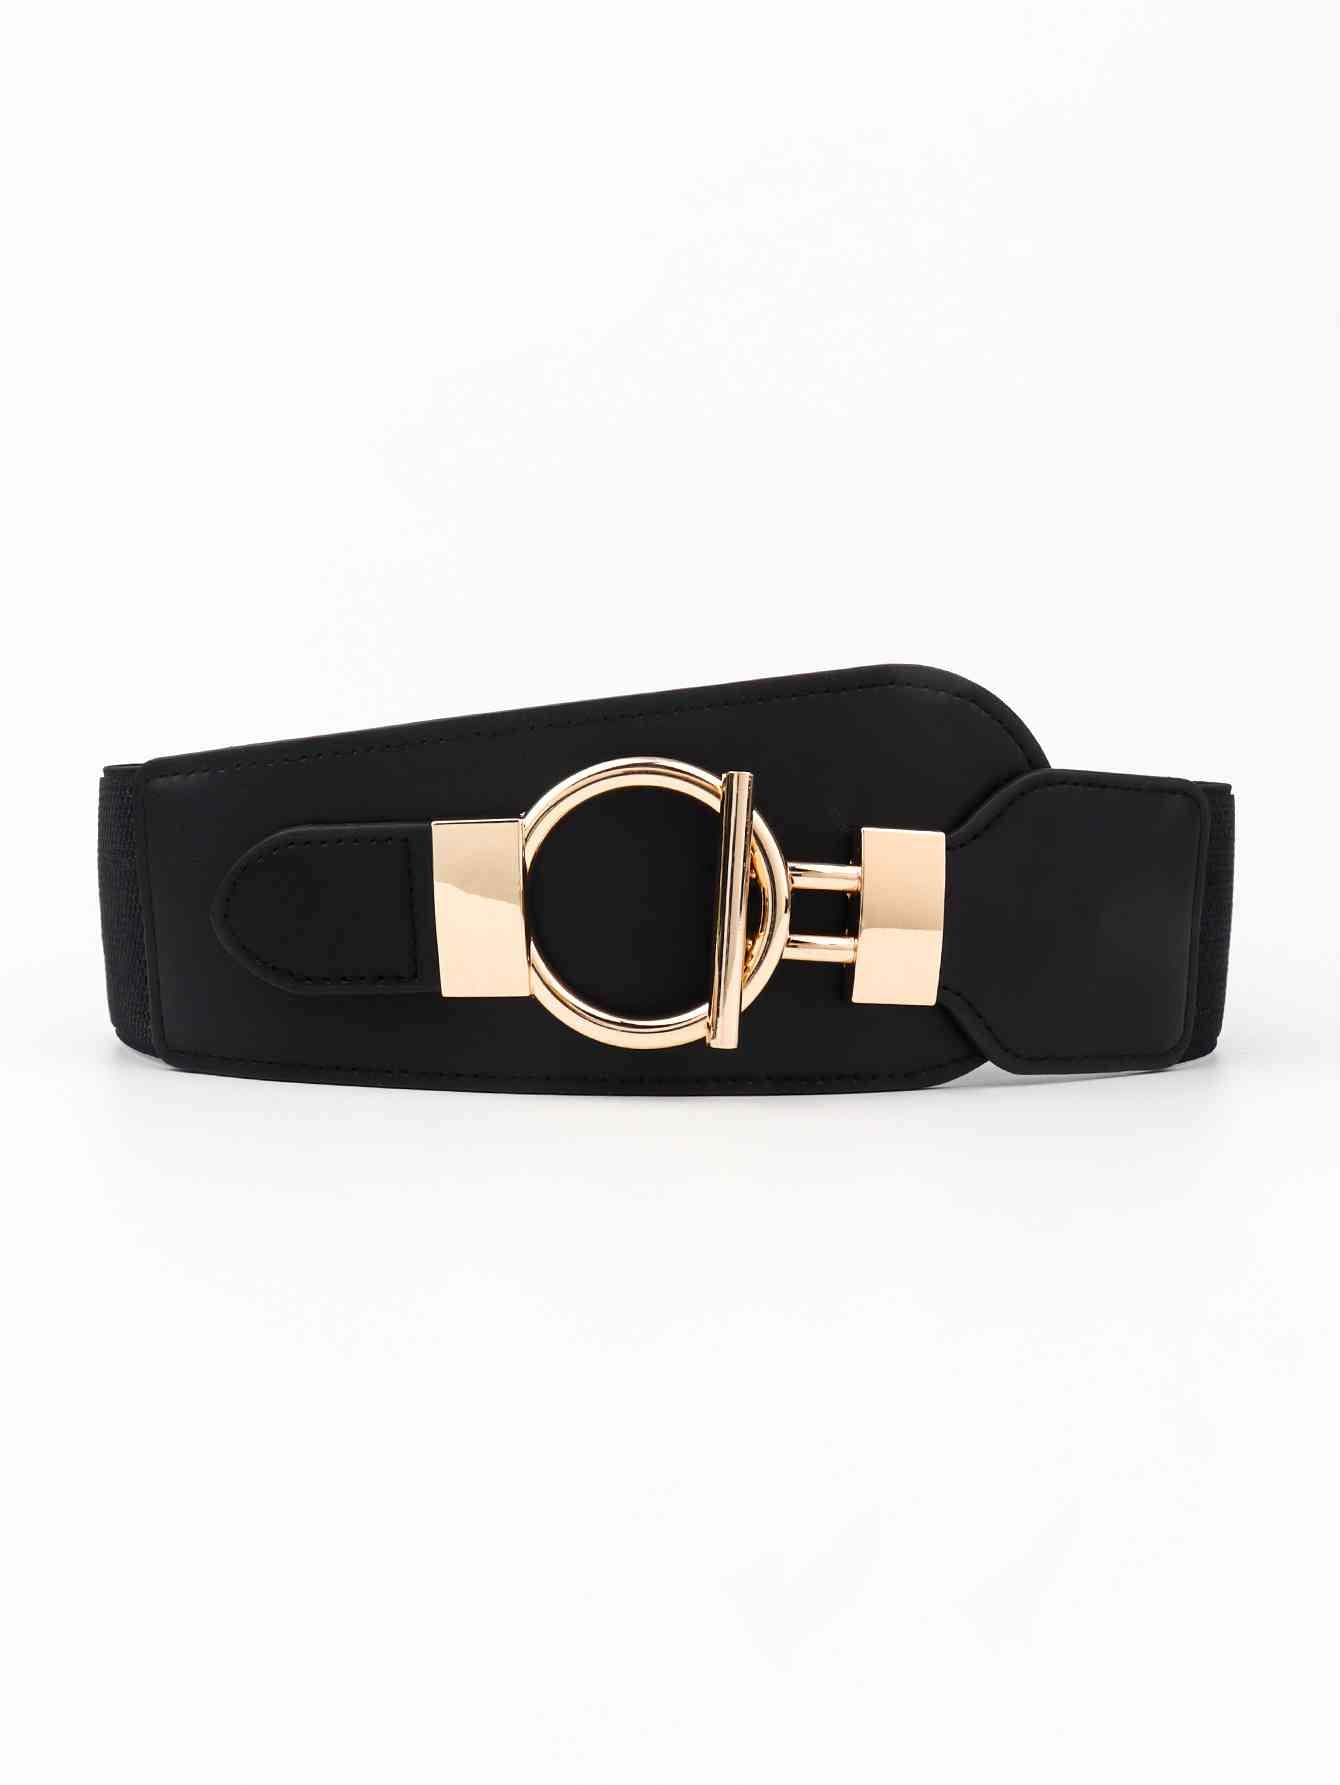 PU Elastic Wide Belt with Alloy Buckle Black One Size